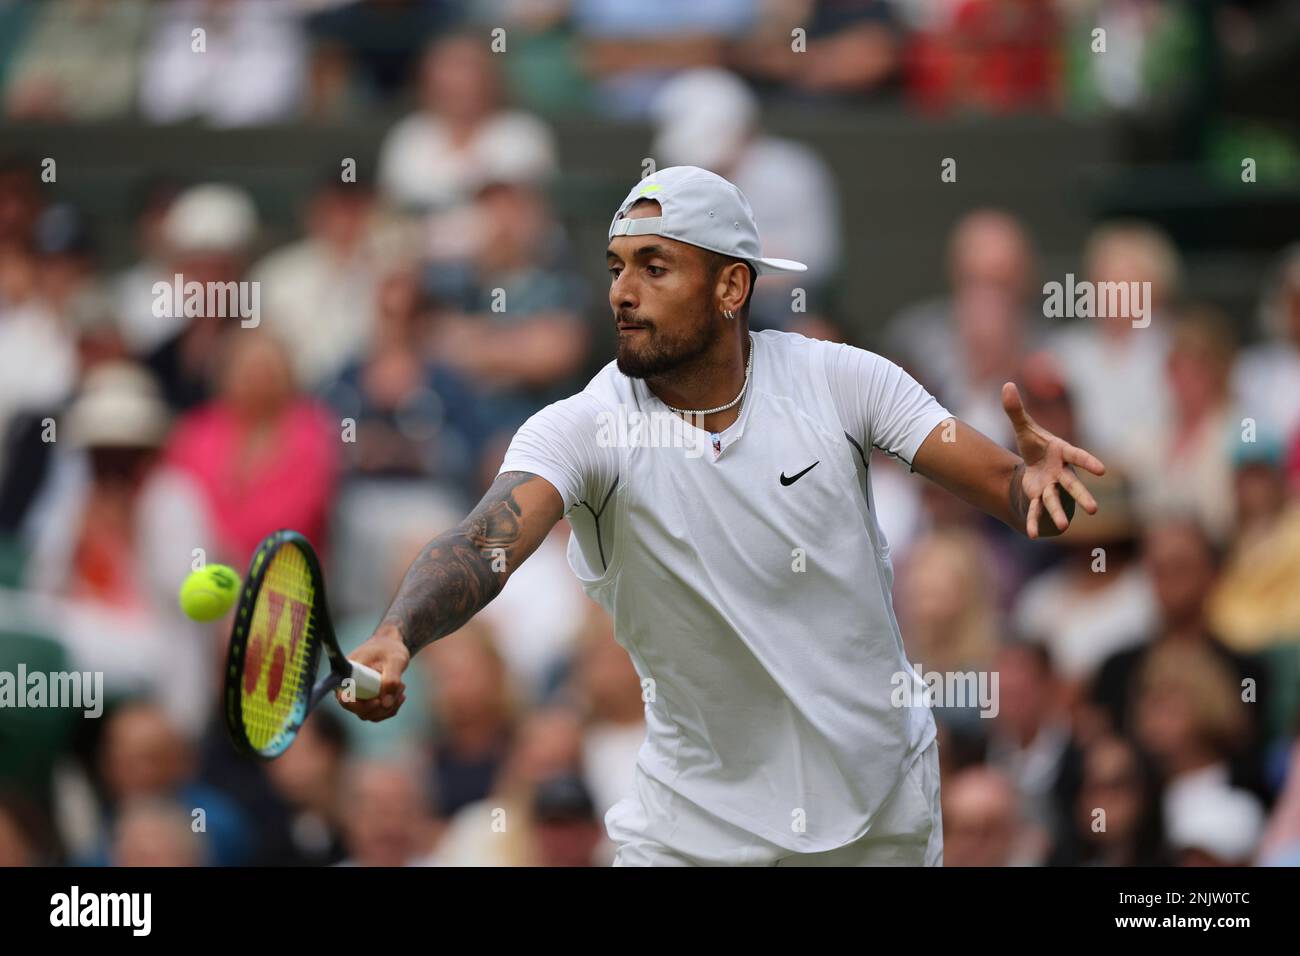 Nick Kyrgios of Australia plays against Stefanos Tsitsipas of Greece during the game of the gentlemens singles third-round match in the Championships, Wimbledon at All England Lawn Tennis and Croquet Club in